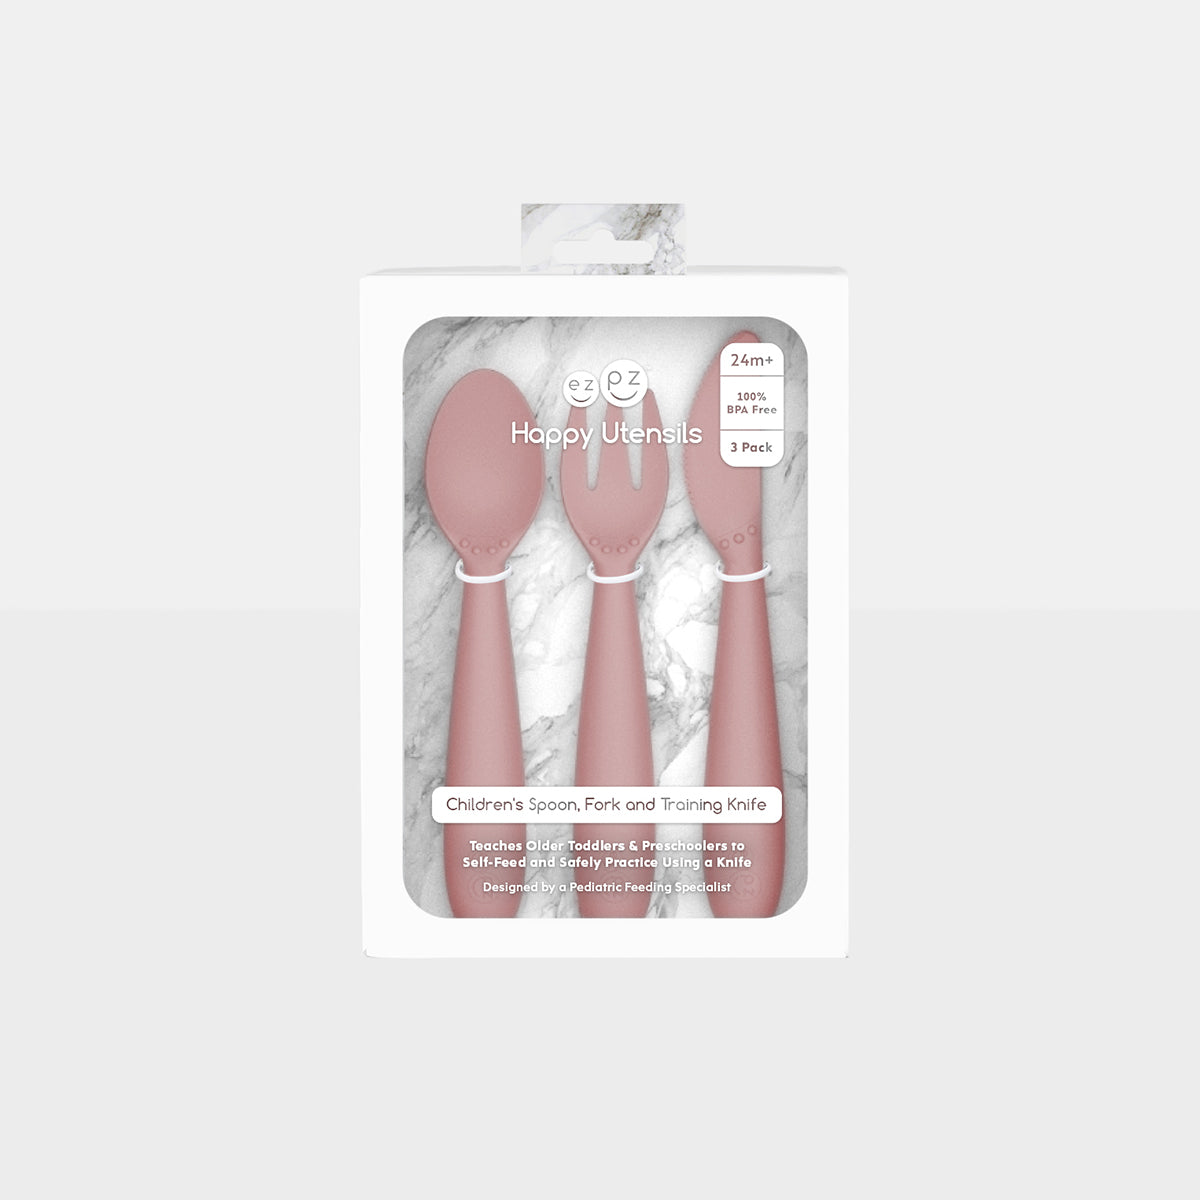 Happy Utensils in Blush by ezpz / Silicone Spoon, Fork and Knife Set for Kids